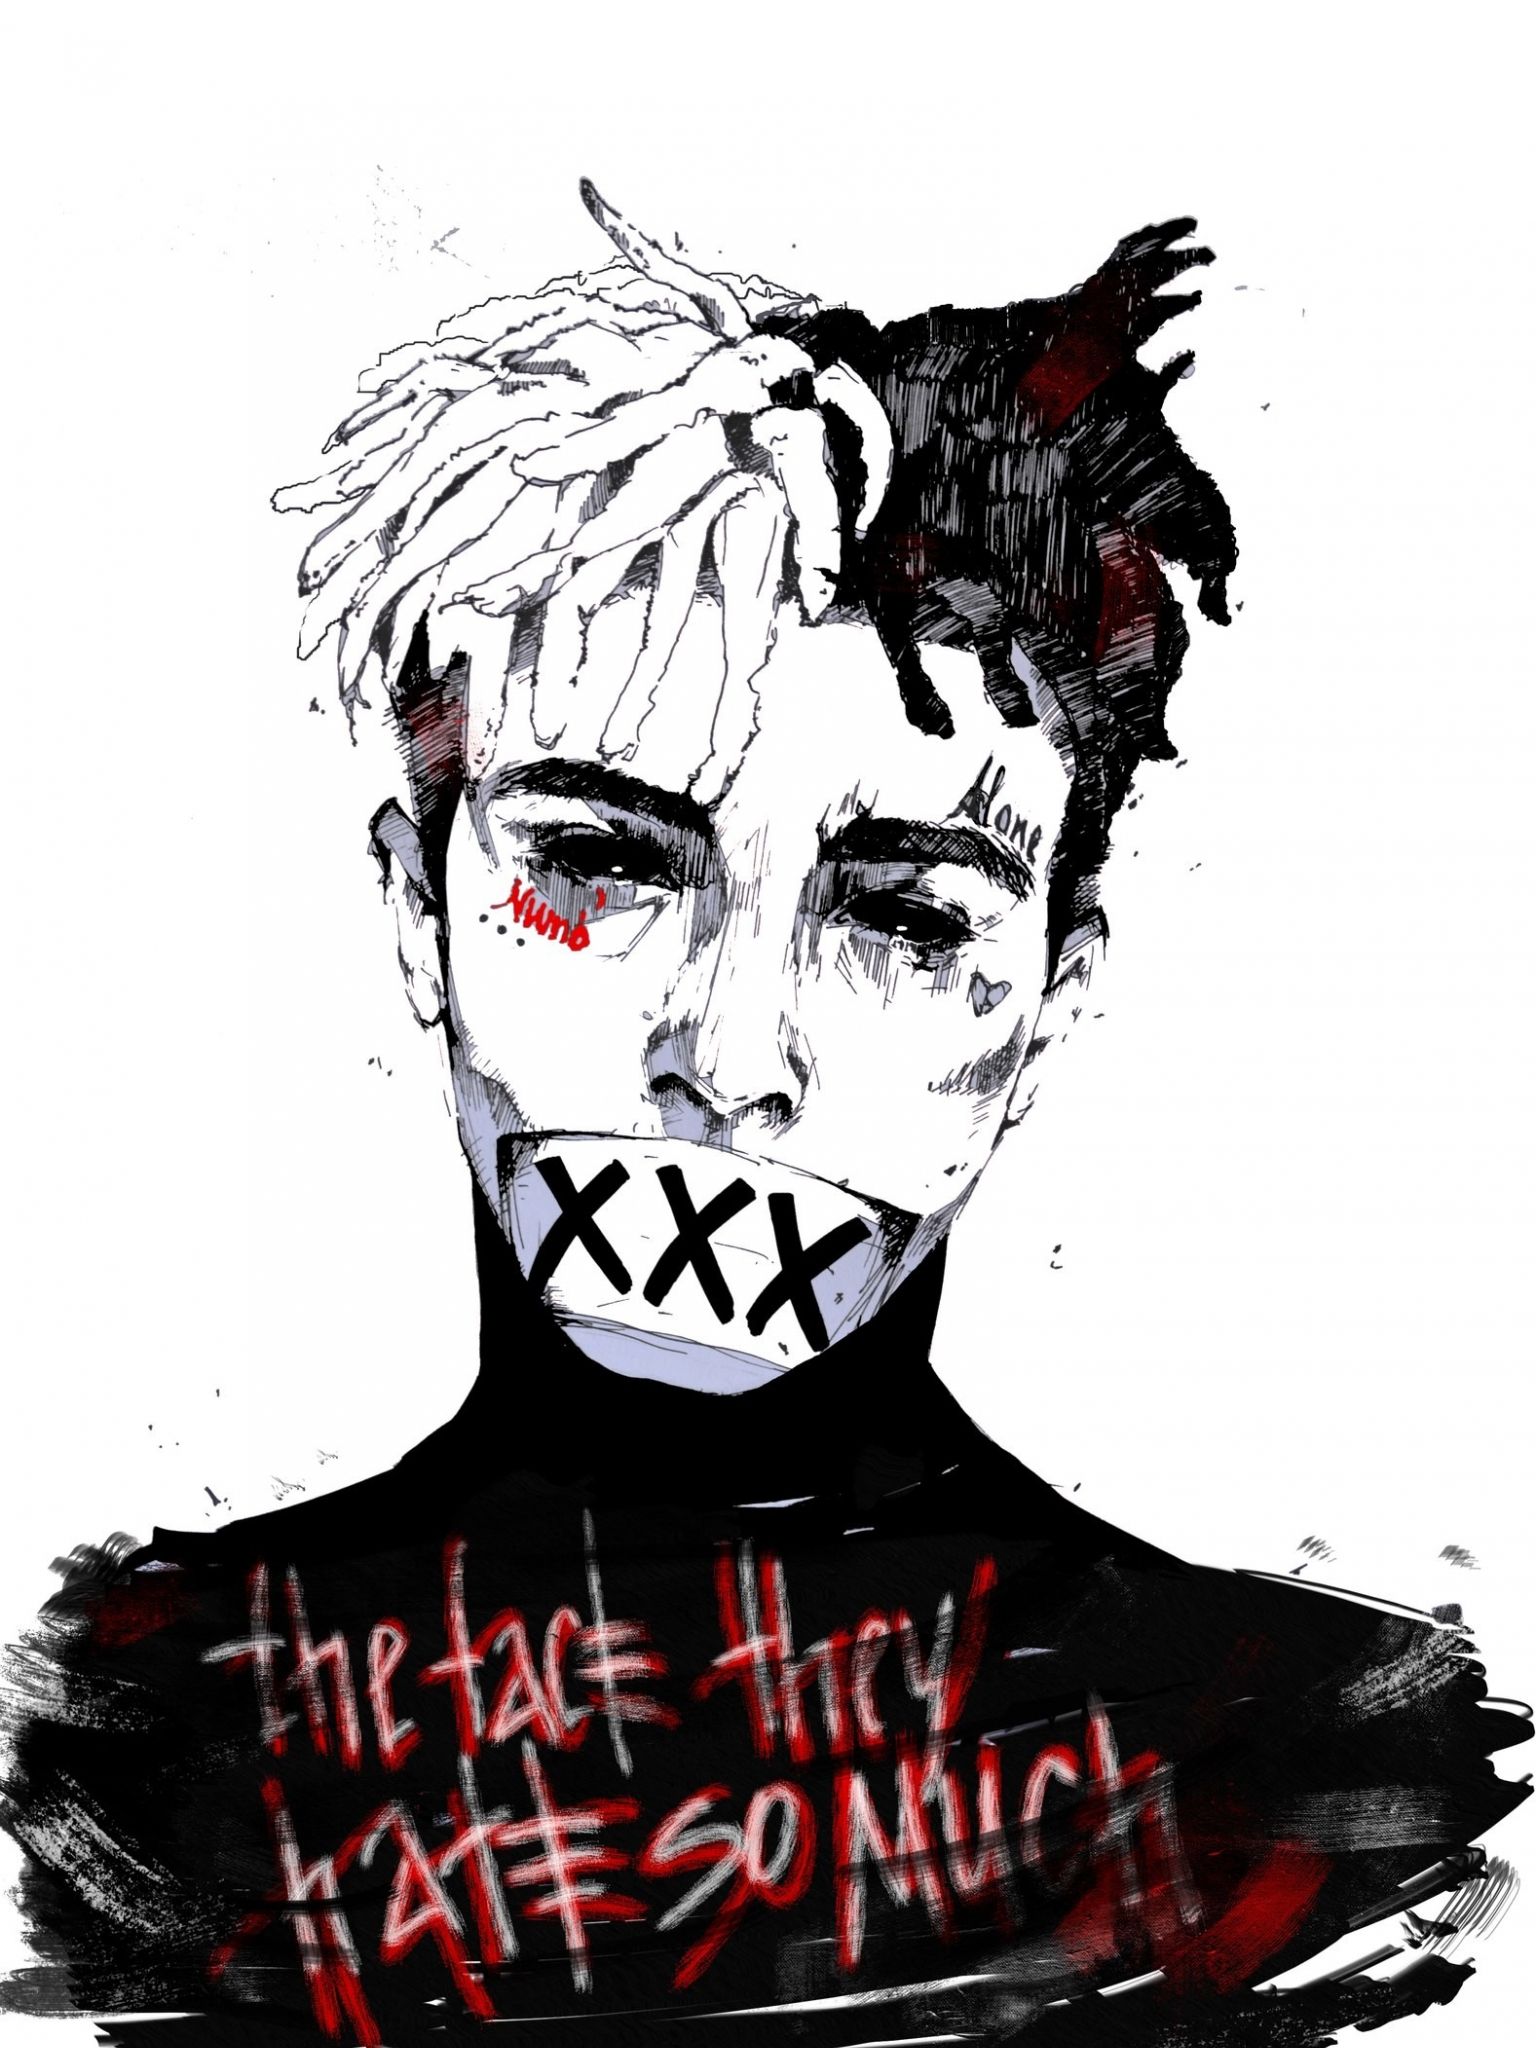 The image is an illustration of XXXTentacion with his mouth taped over with the word XXX. - XXXTentacion